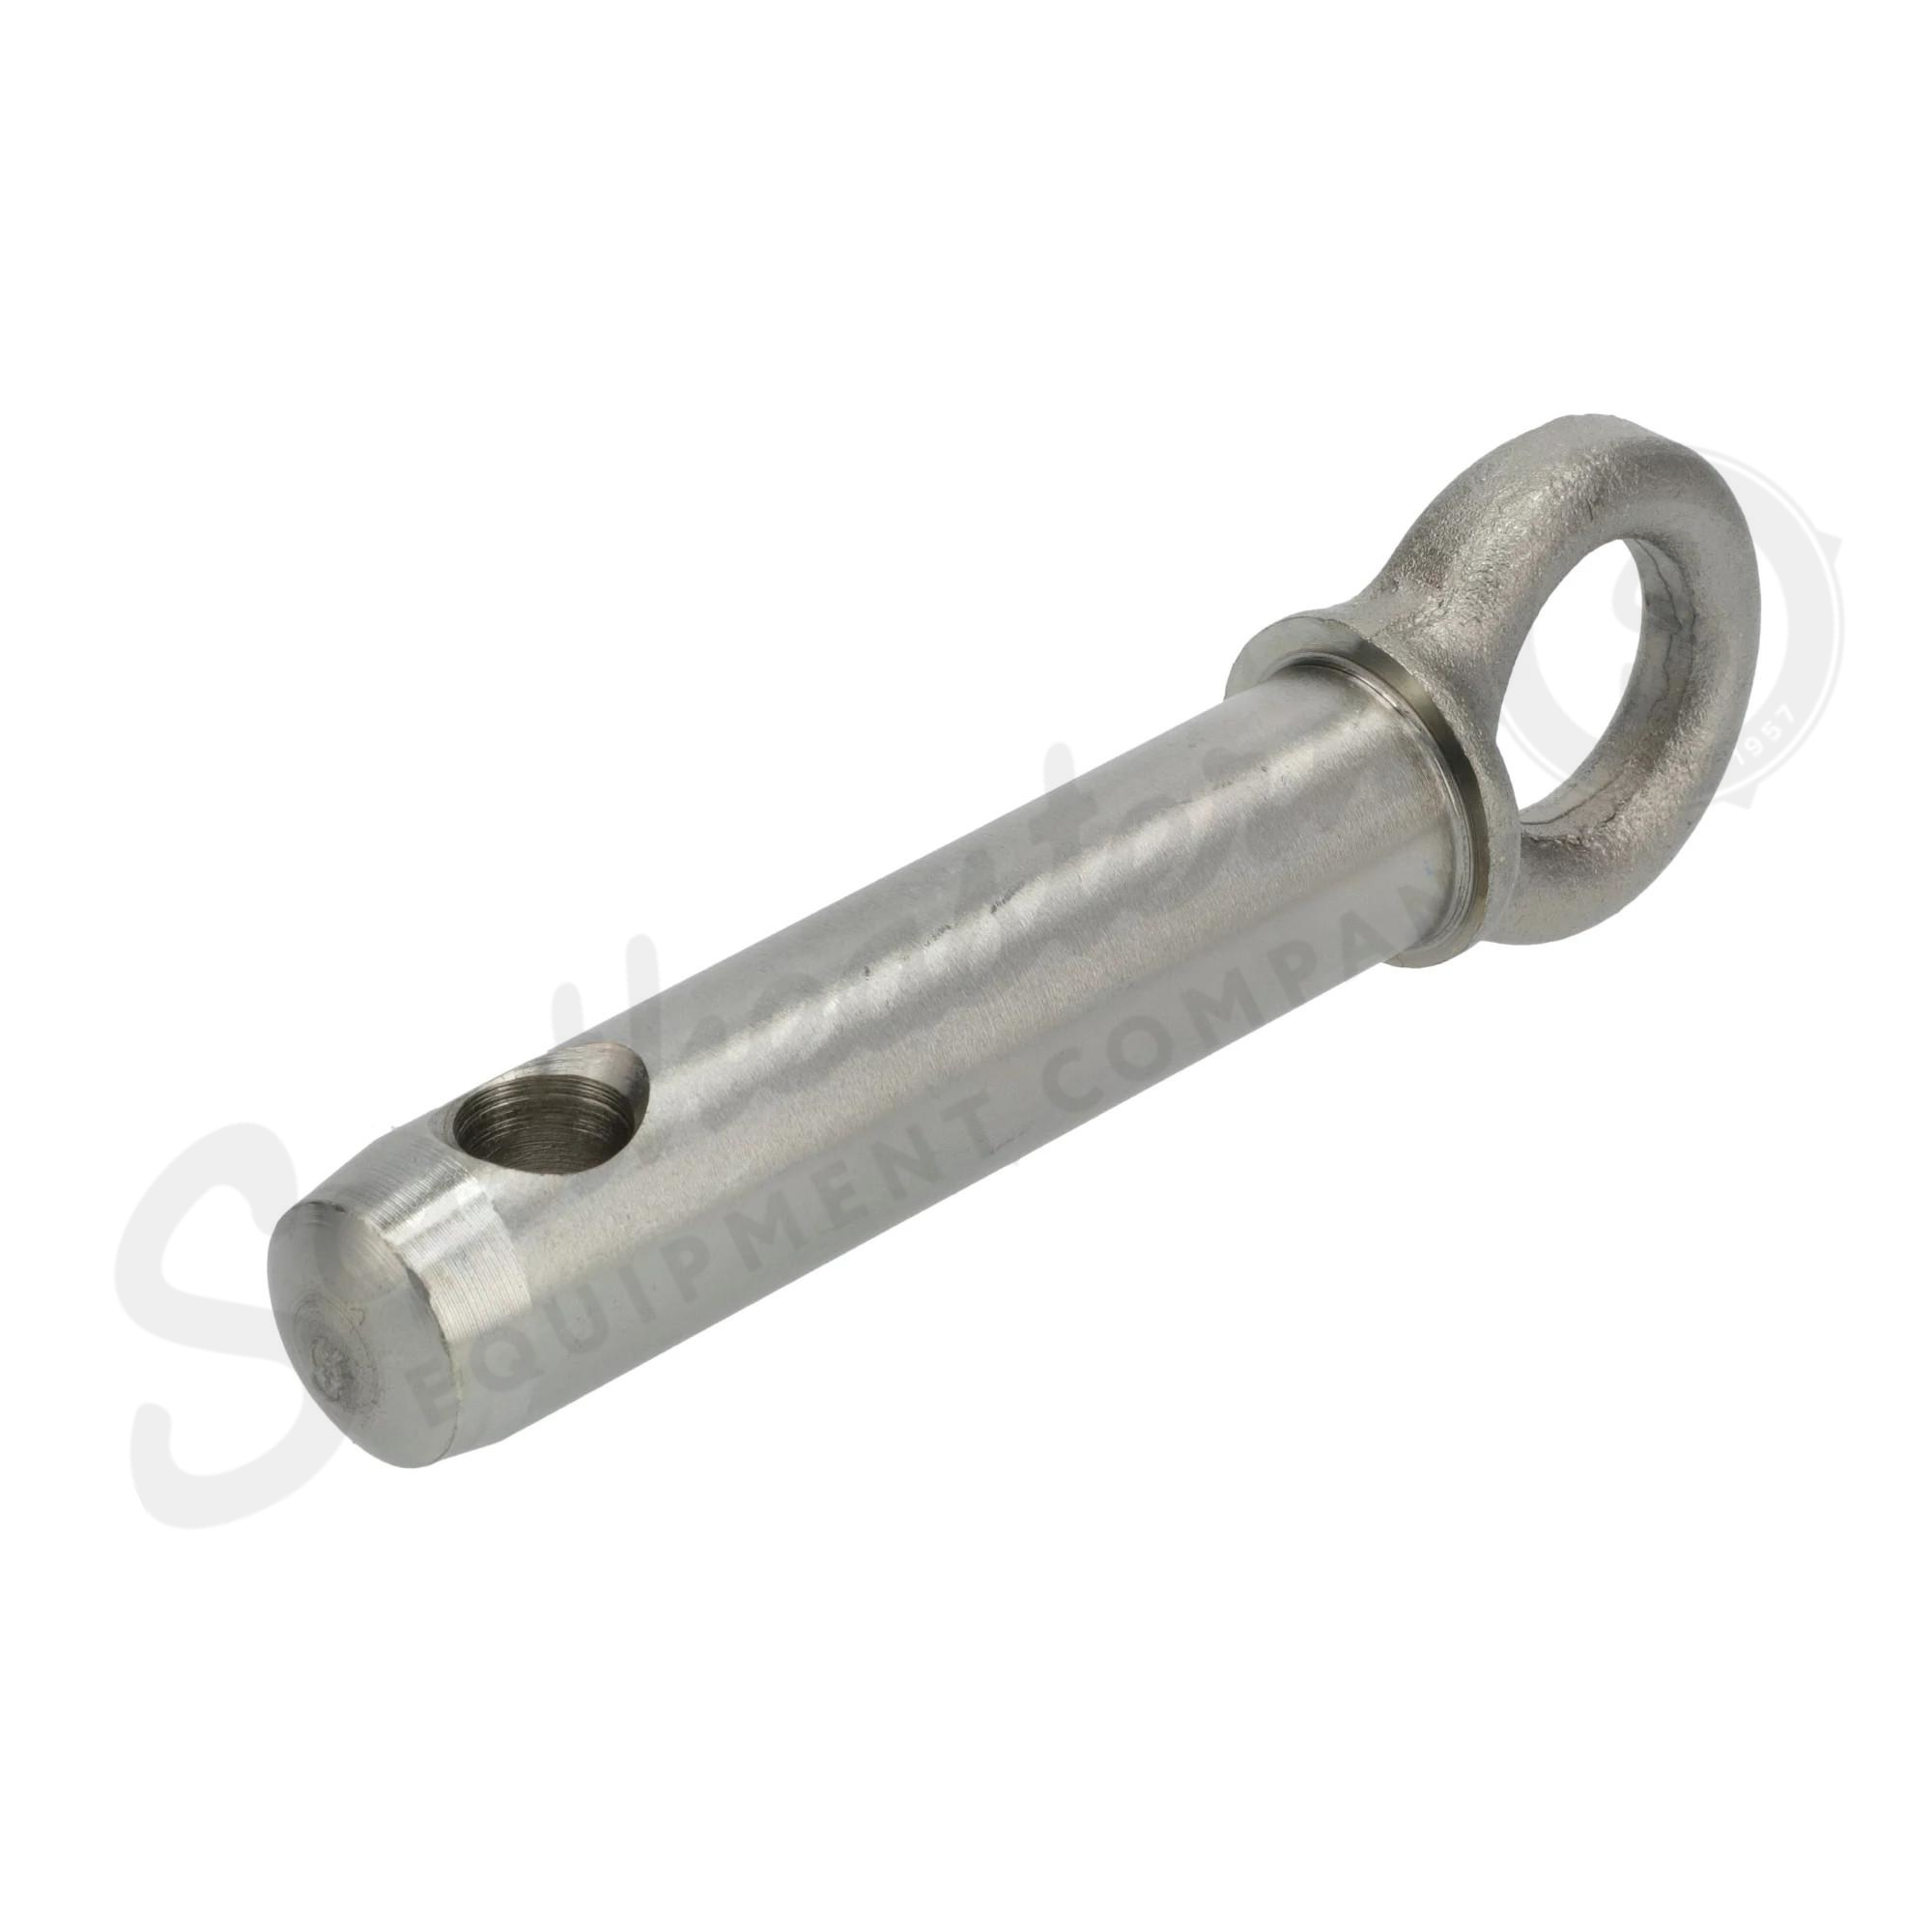 Pin for rear top link - 25.5mm OD x 137mm L marketing